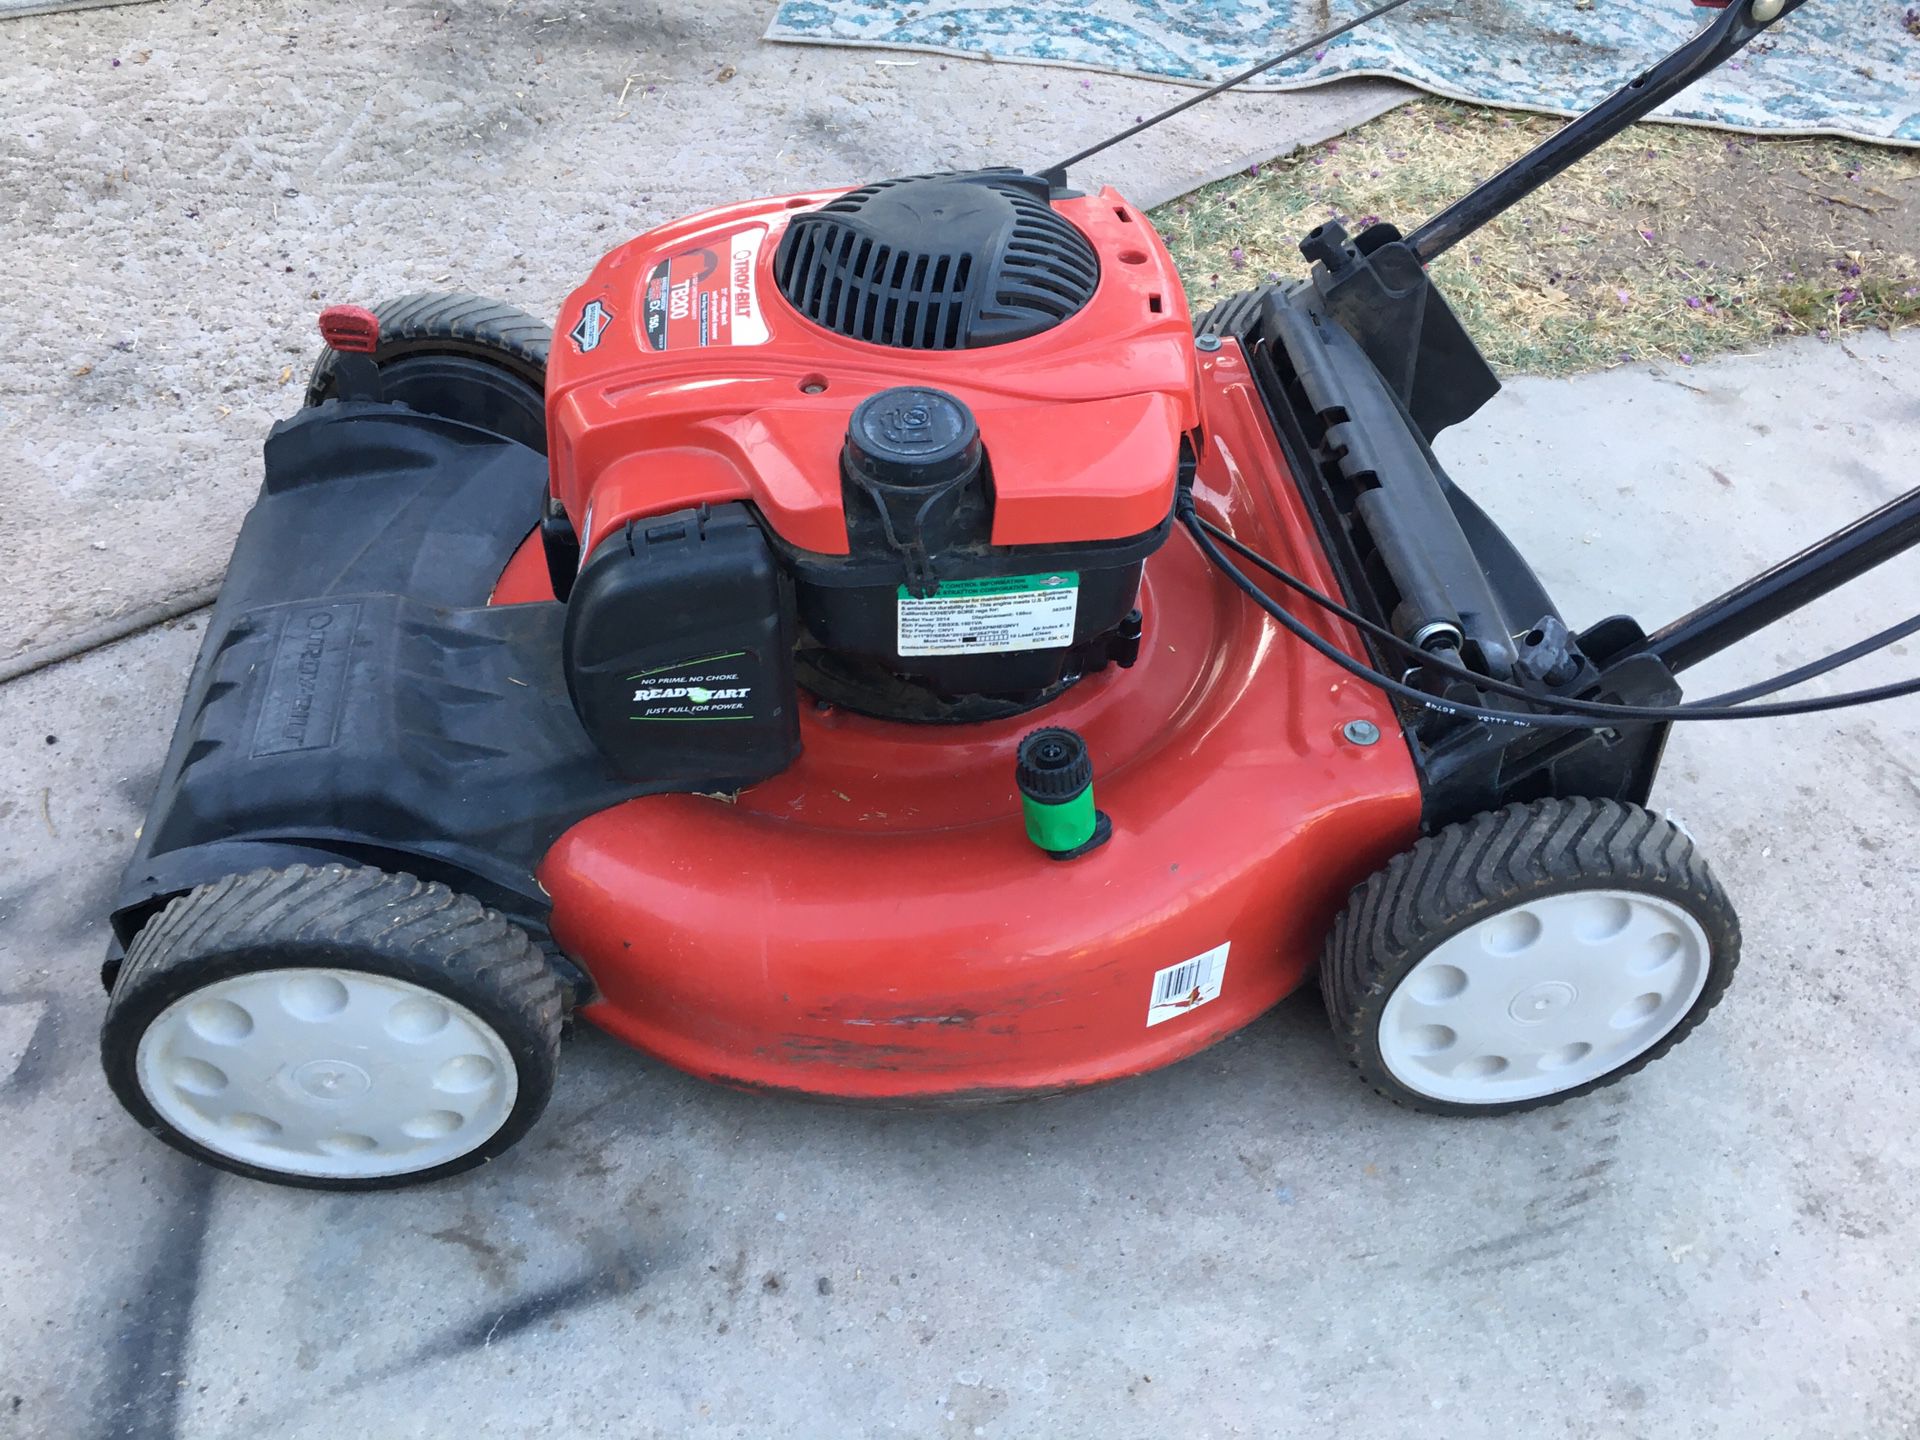 Troy-Bilt TB200 150-cc 21-in Self-propelled Gas Lawn Mower with Briggs & Stratton Engine no bag works great